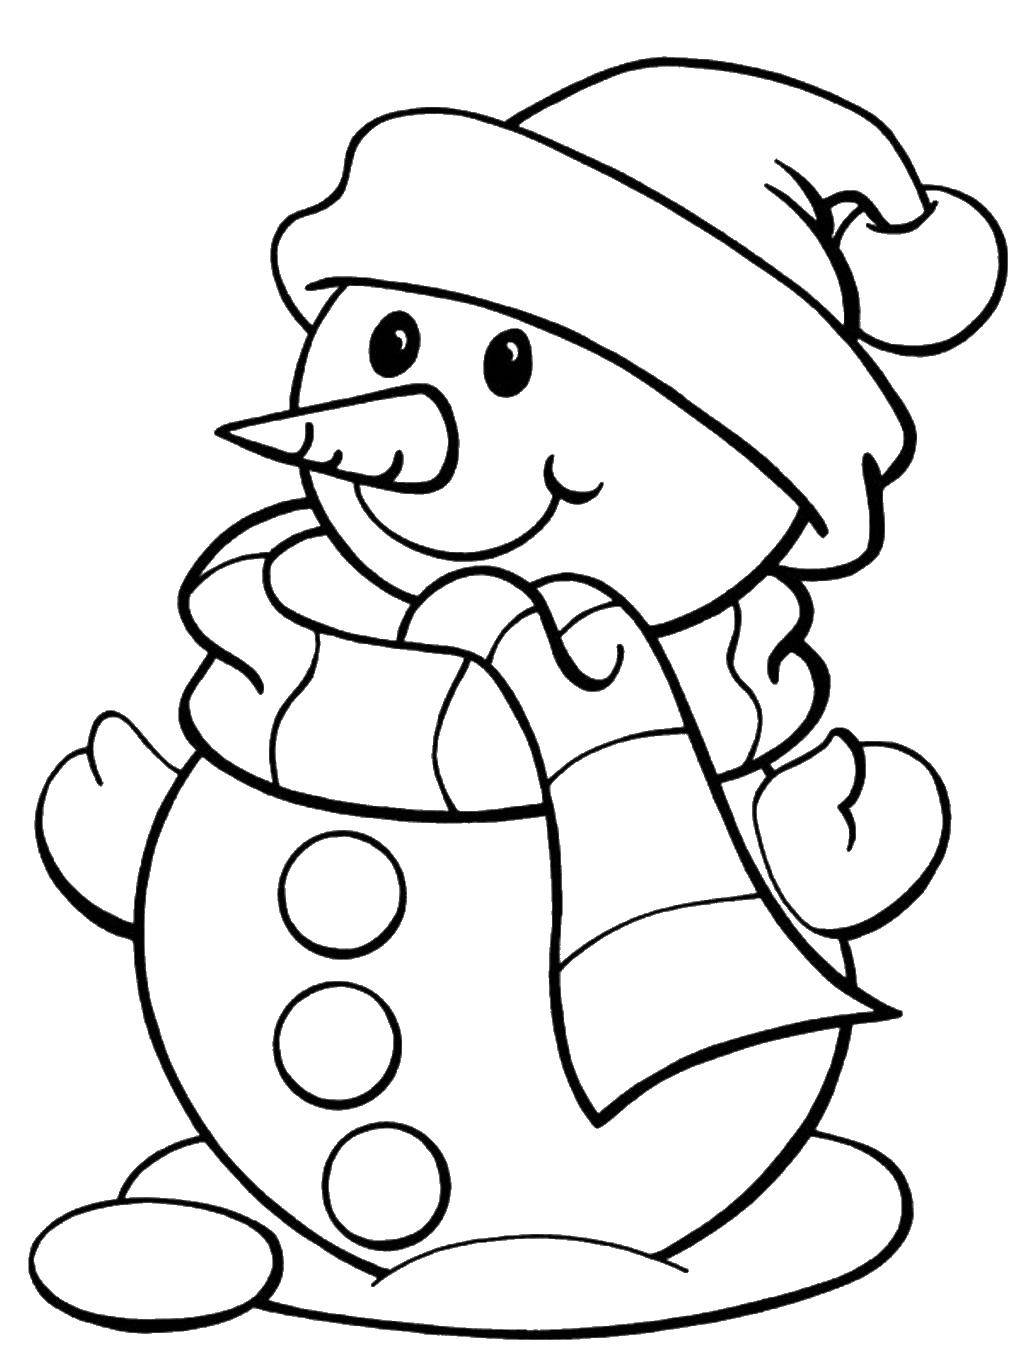 Coloring Warmly dressed man. Category coloring winter. Tags:  Snowman, snow, winter.